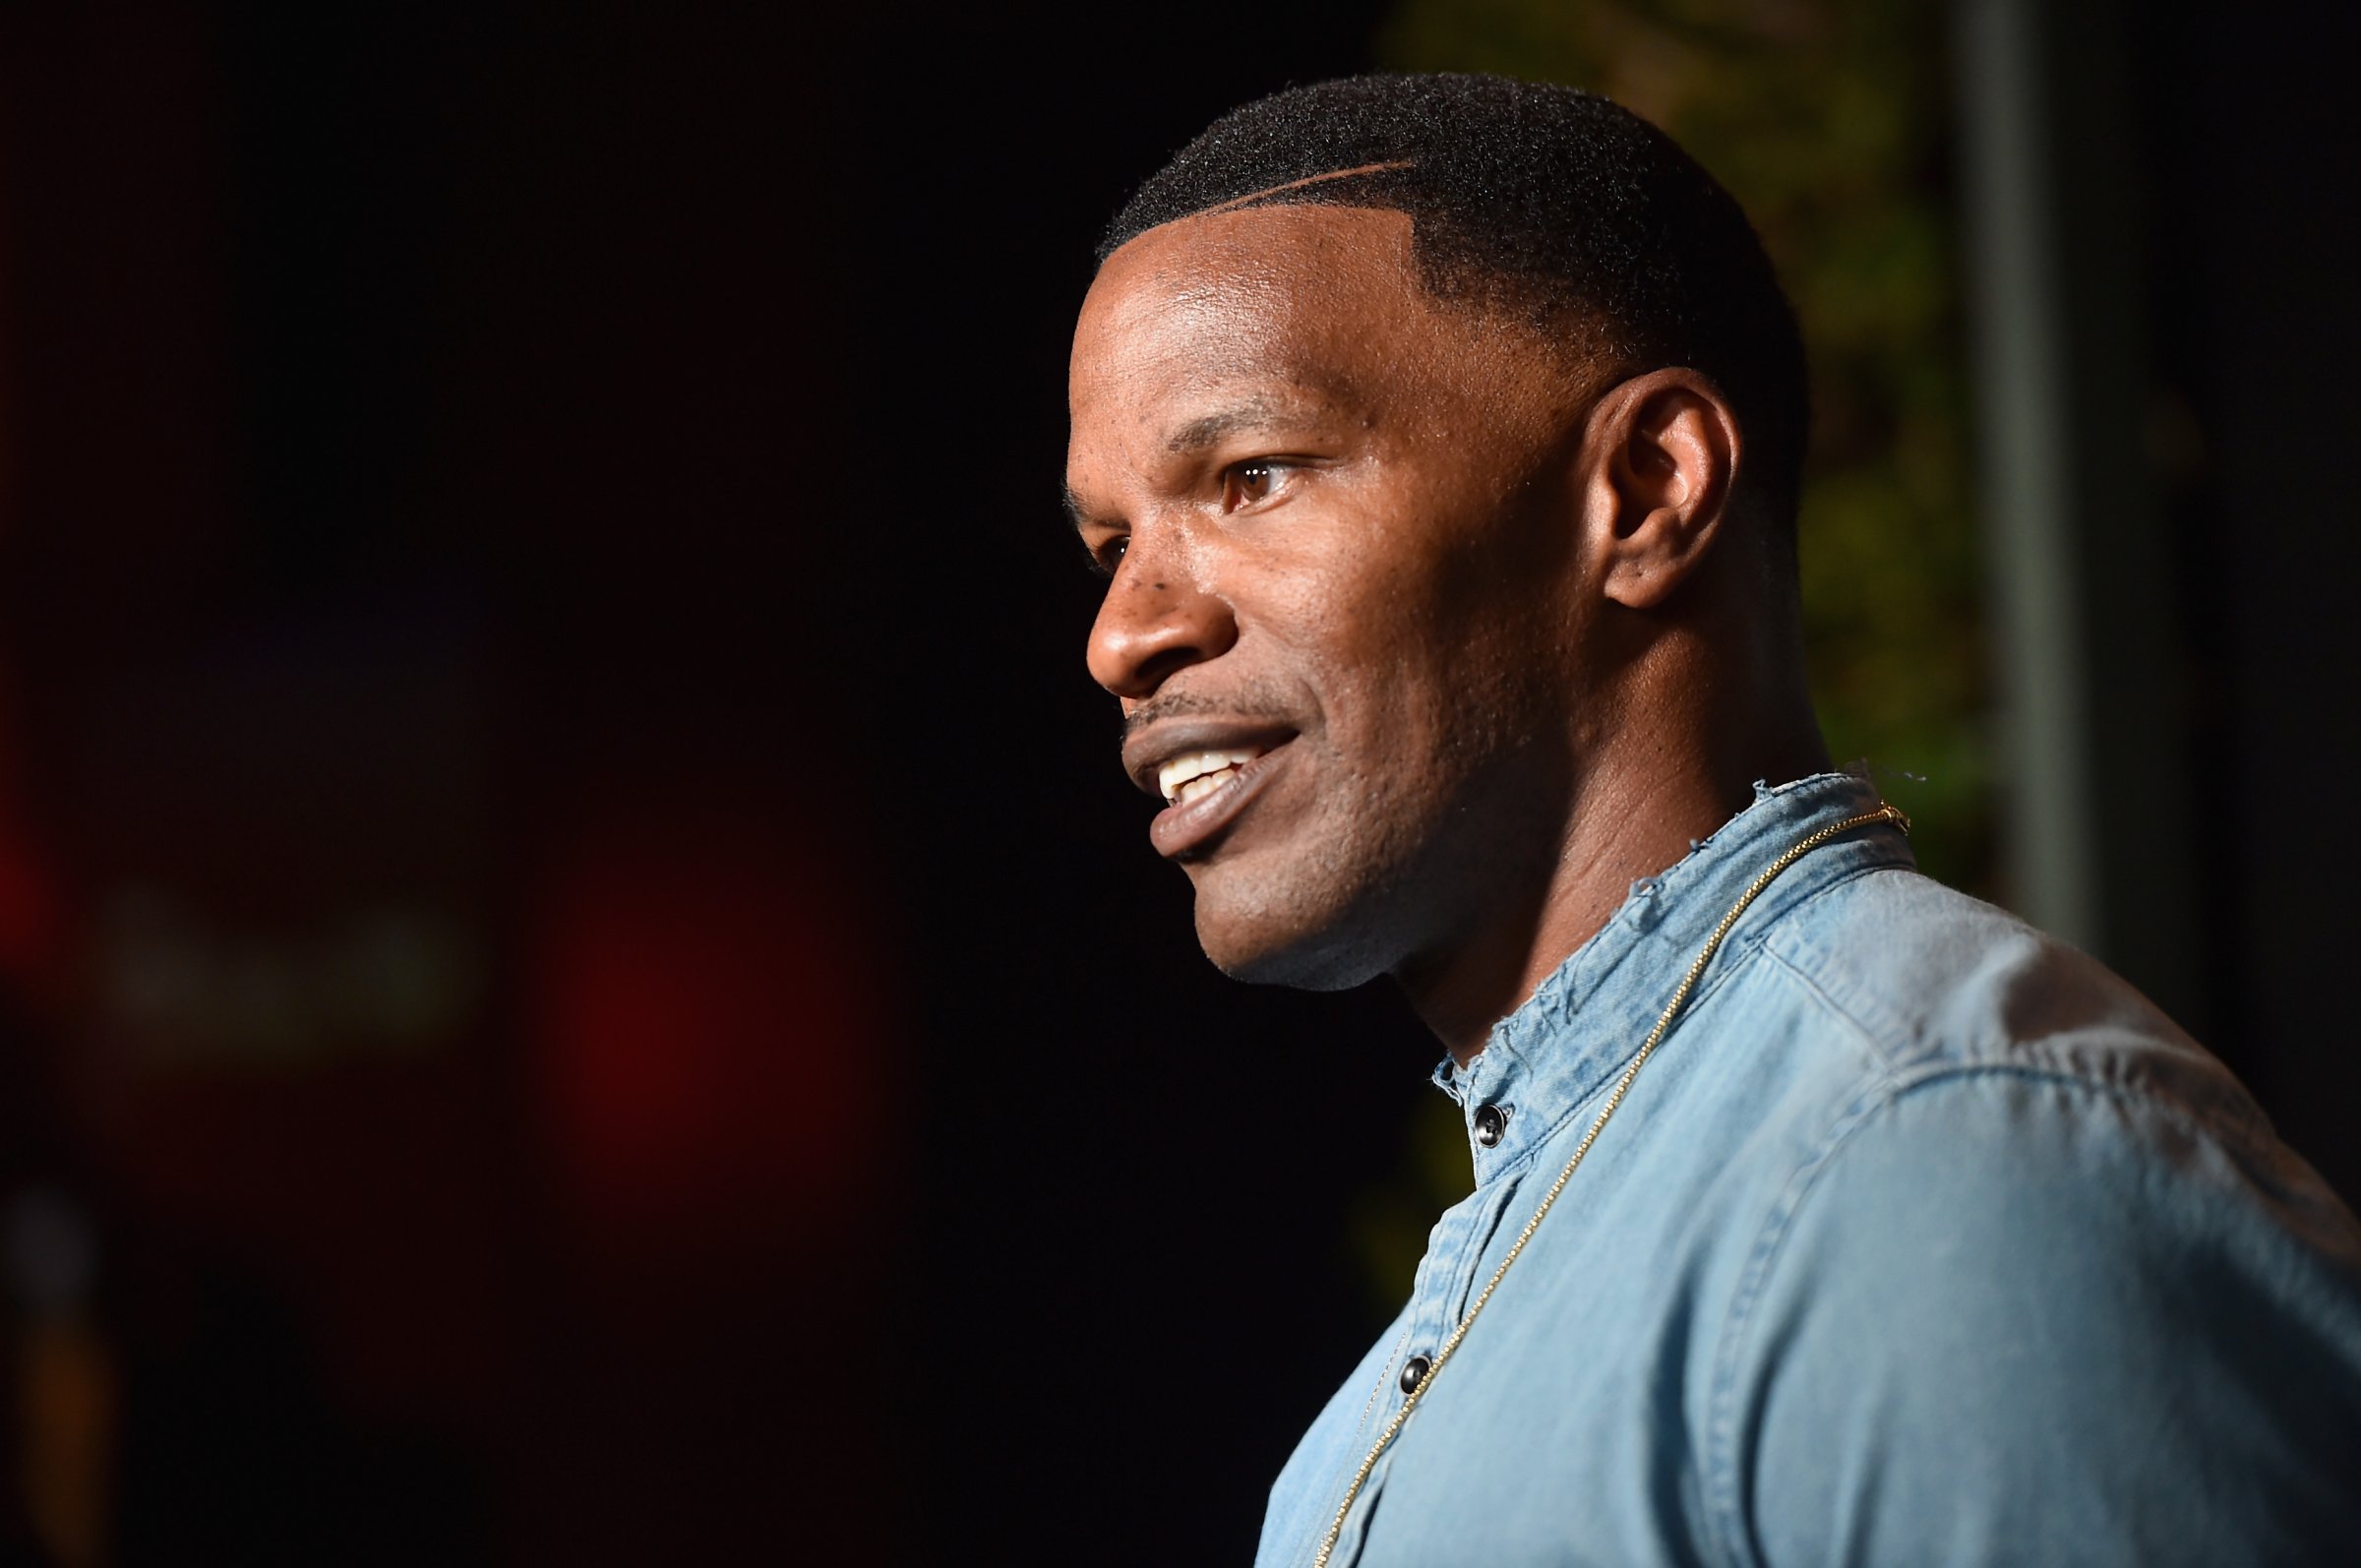 Actor Jamie Foxx attends the Samsung Galaxy S6 Edge Plus and Note 5 Launch party on Aug. 18, 2015 in West Hollywood, California.